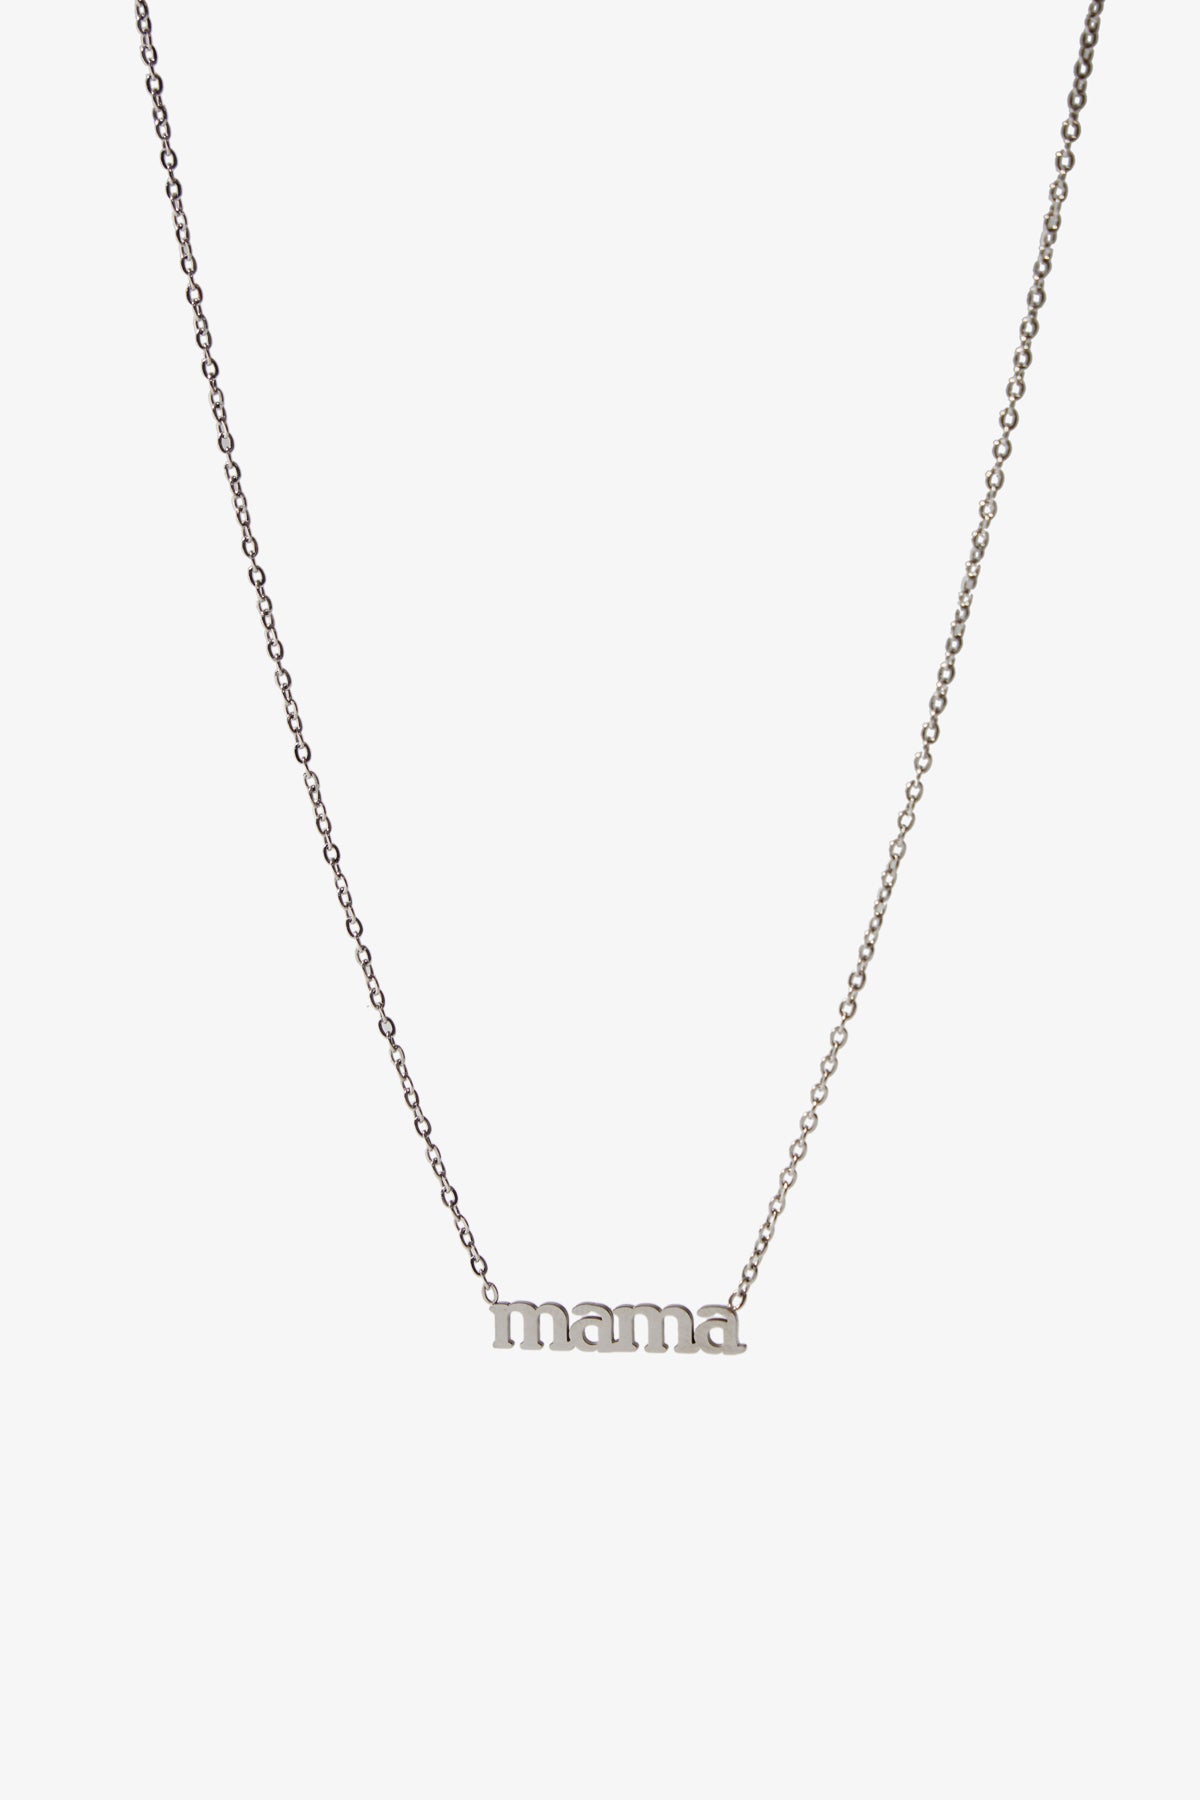 Mama Script Necklace 10K Yellow Gold 18